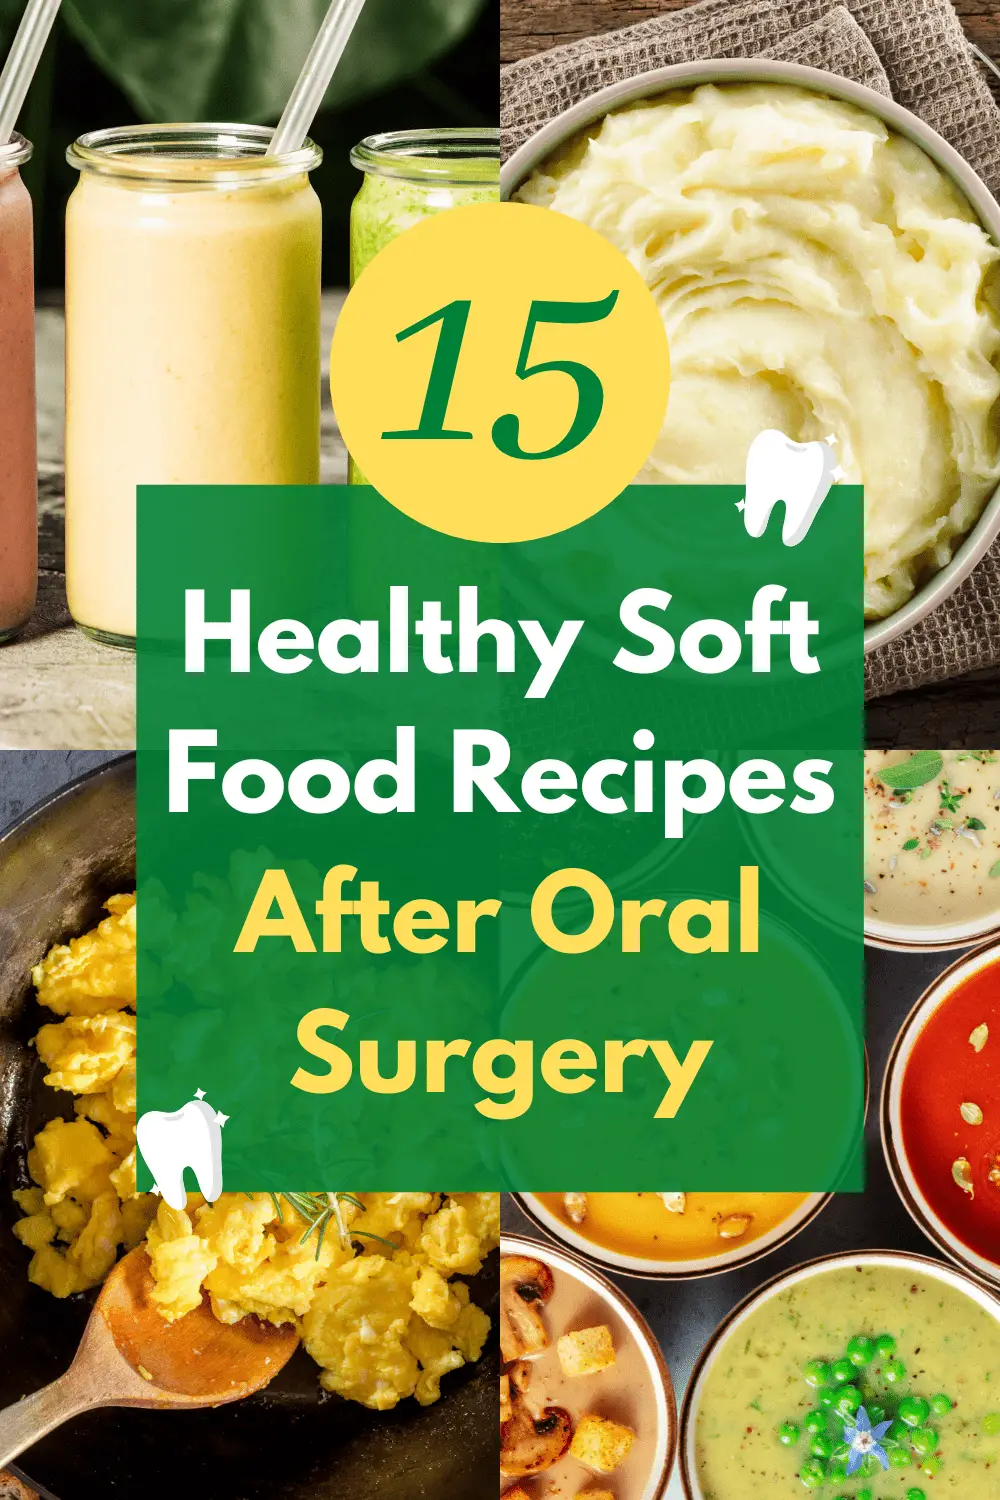 15 healthy soft food recipes after oral surgery image with soup, smoothies, mashed potatoes and scrambled eggs on it